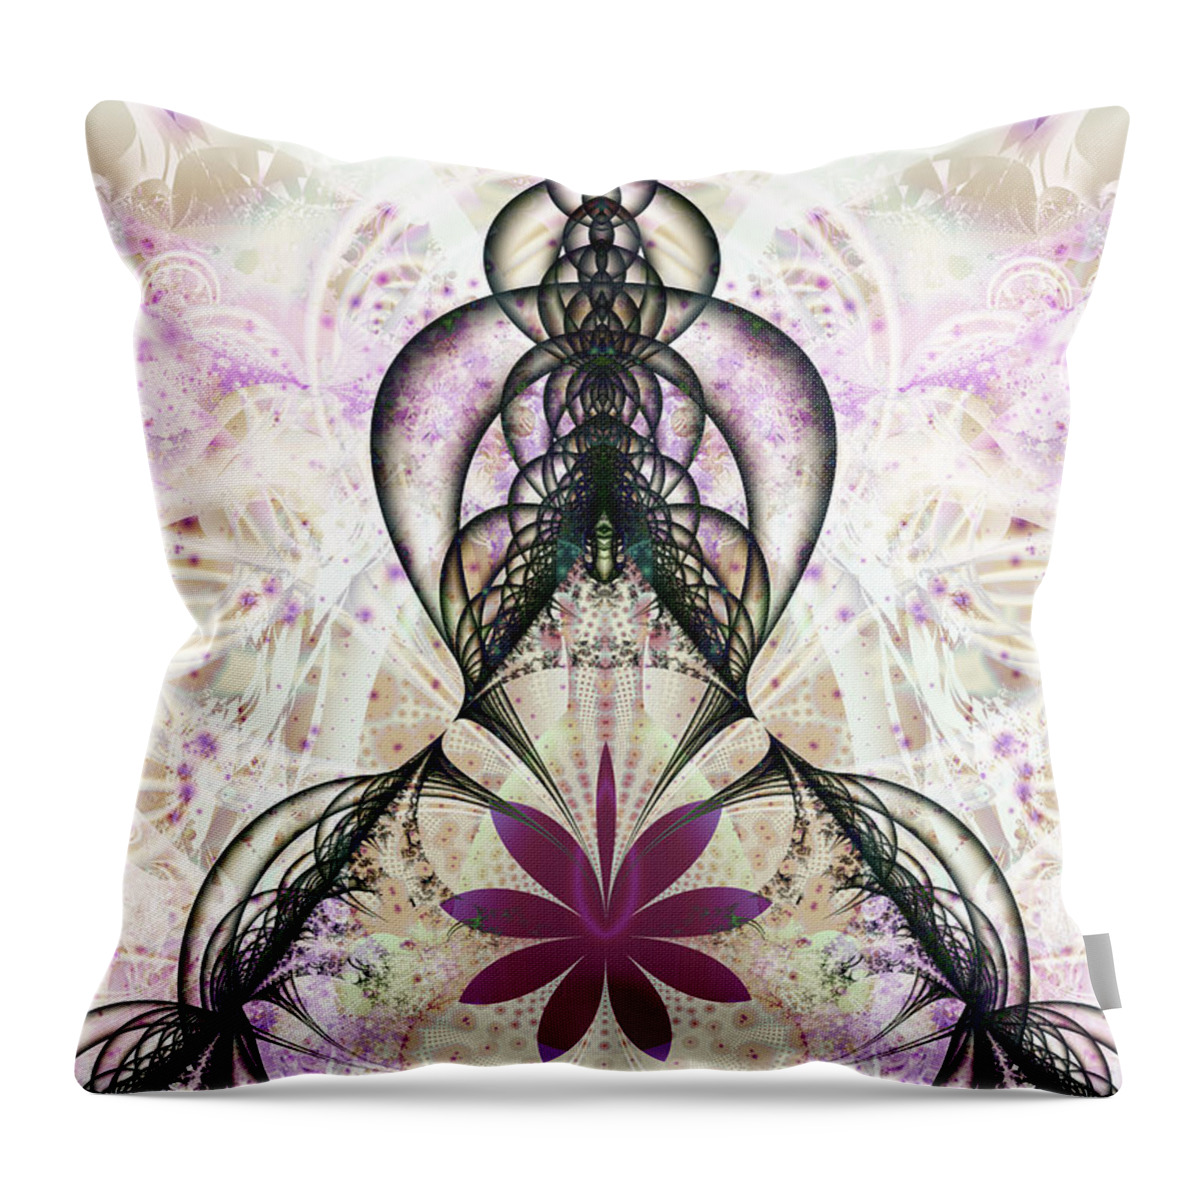 Fractal Throw Pillow featuring the digital art Flower Gate by Frederic Durville